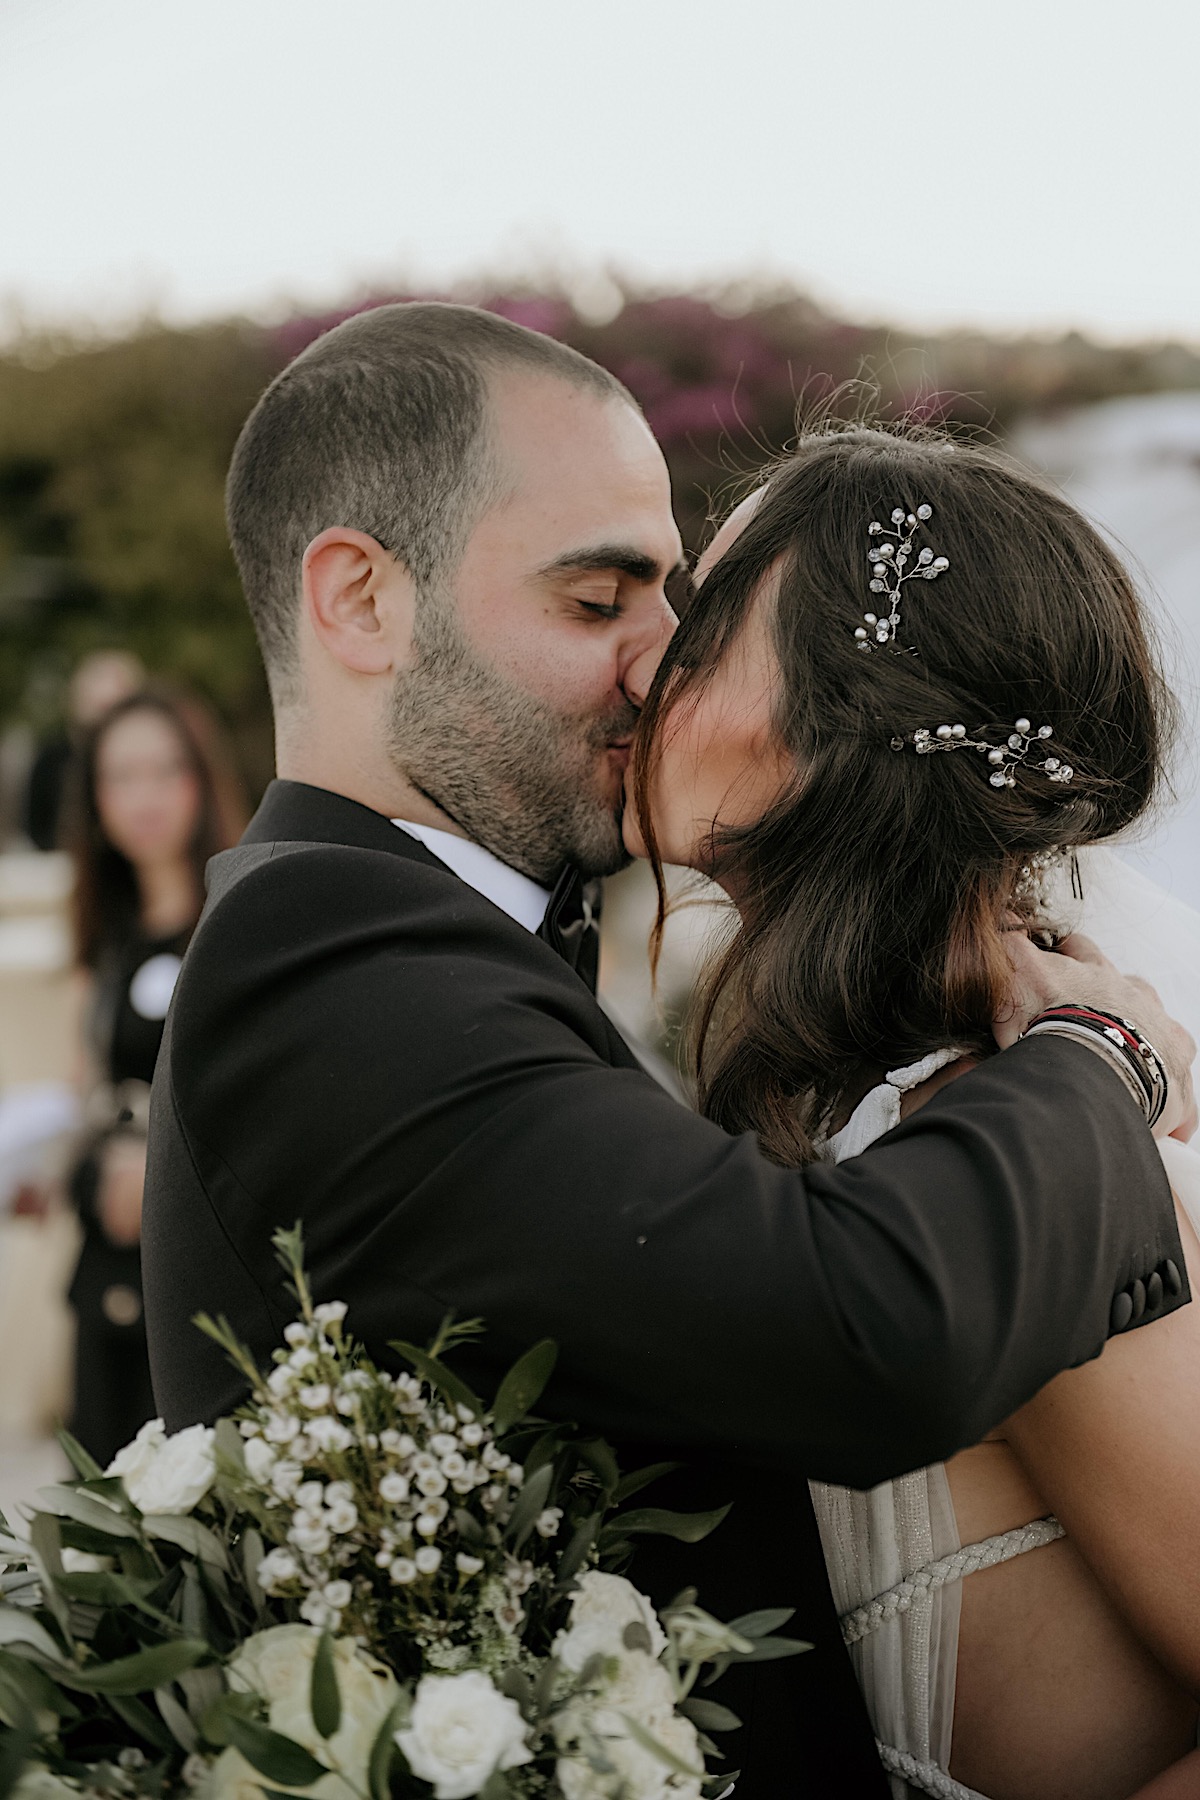 Romantic first kiss at destination wedding ceremony in Greece